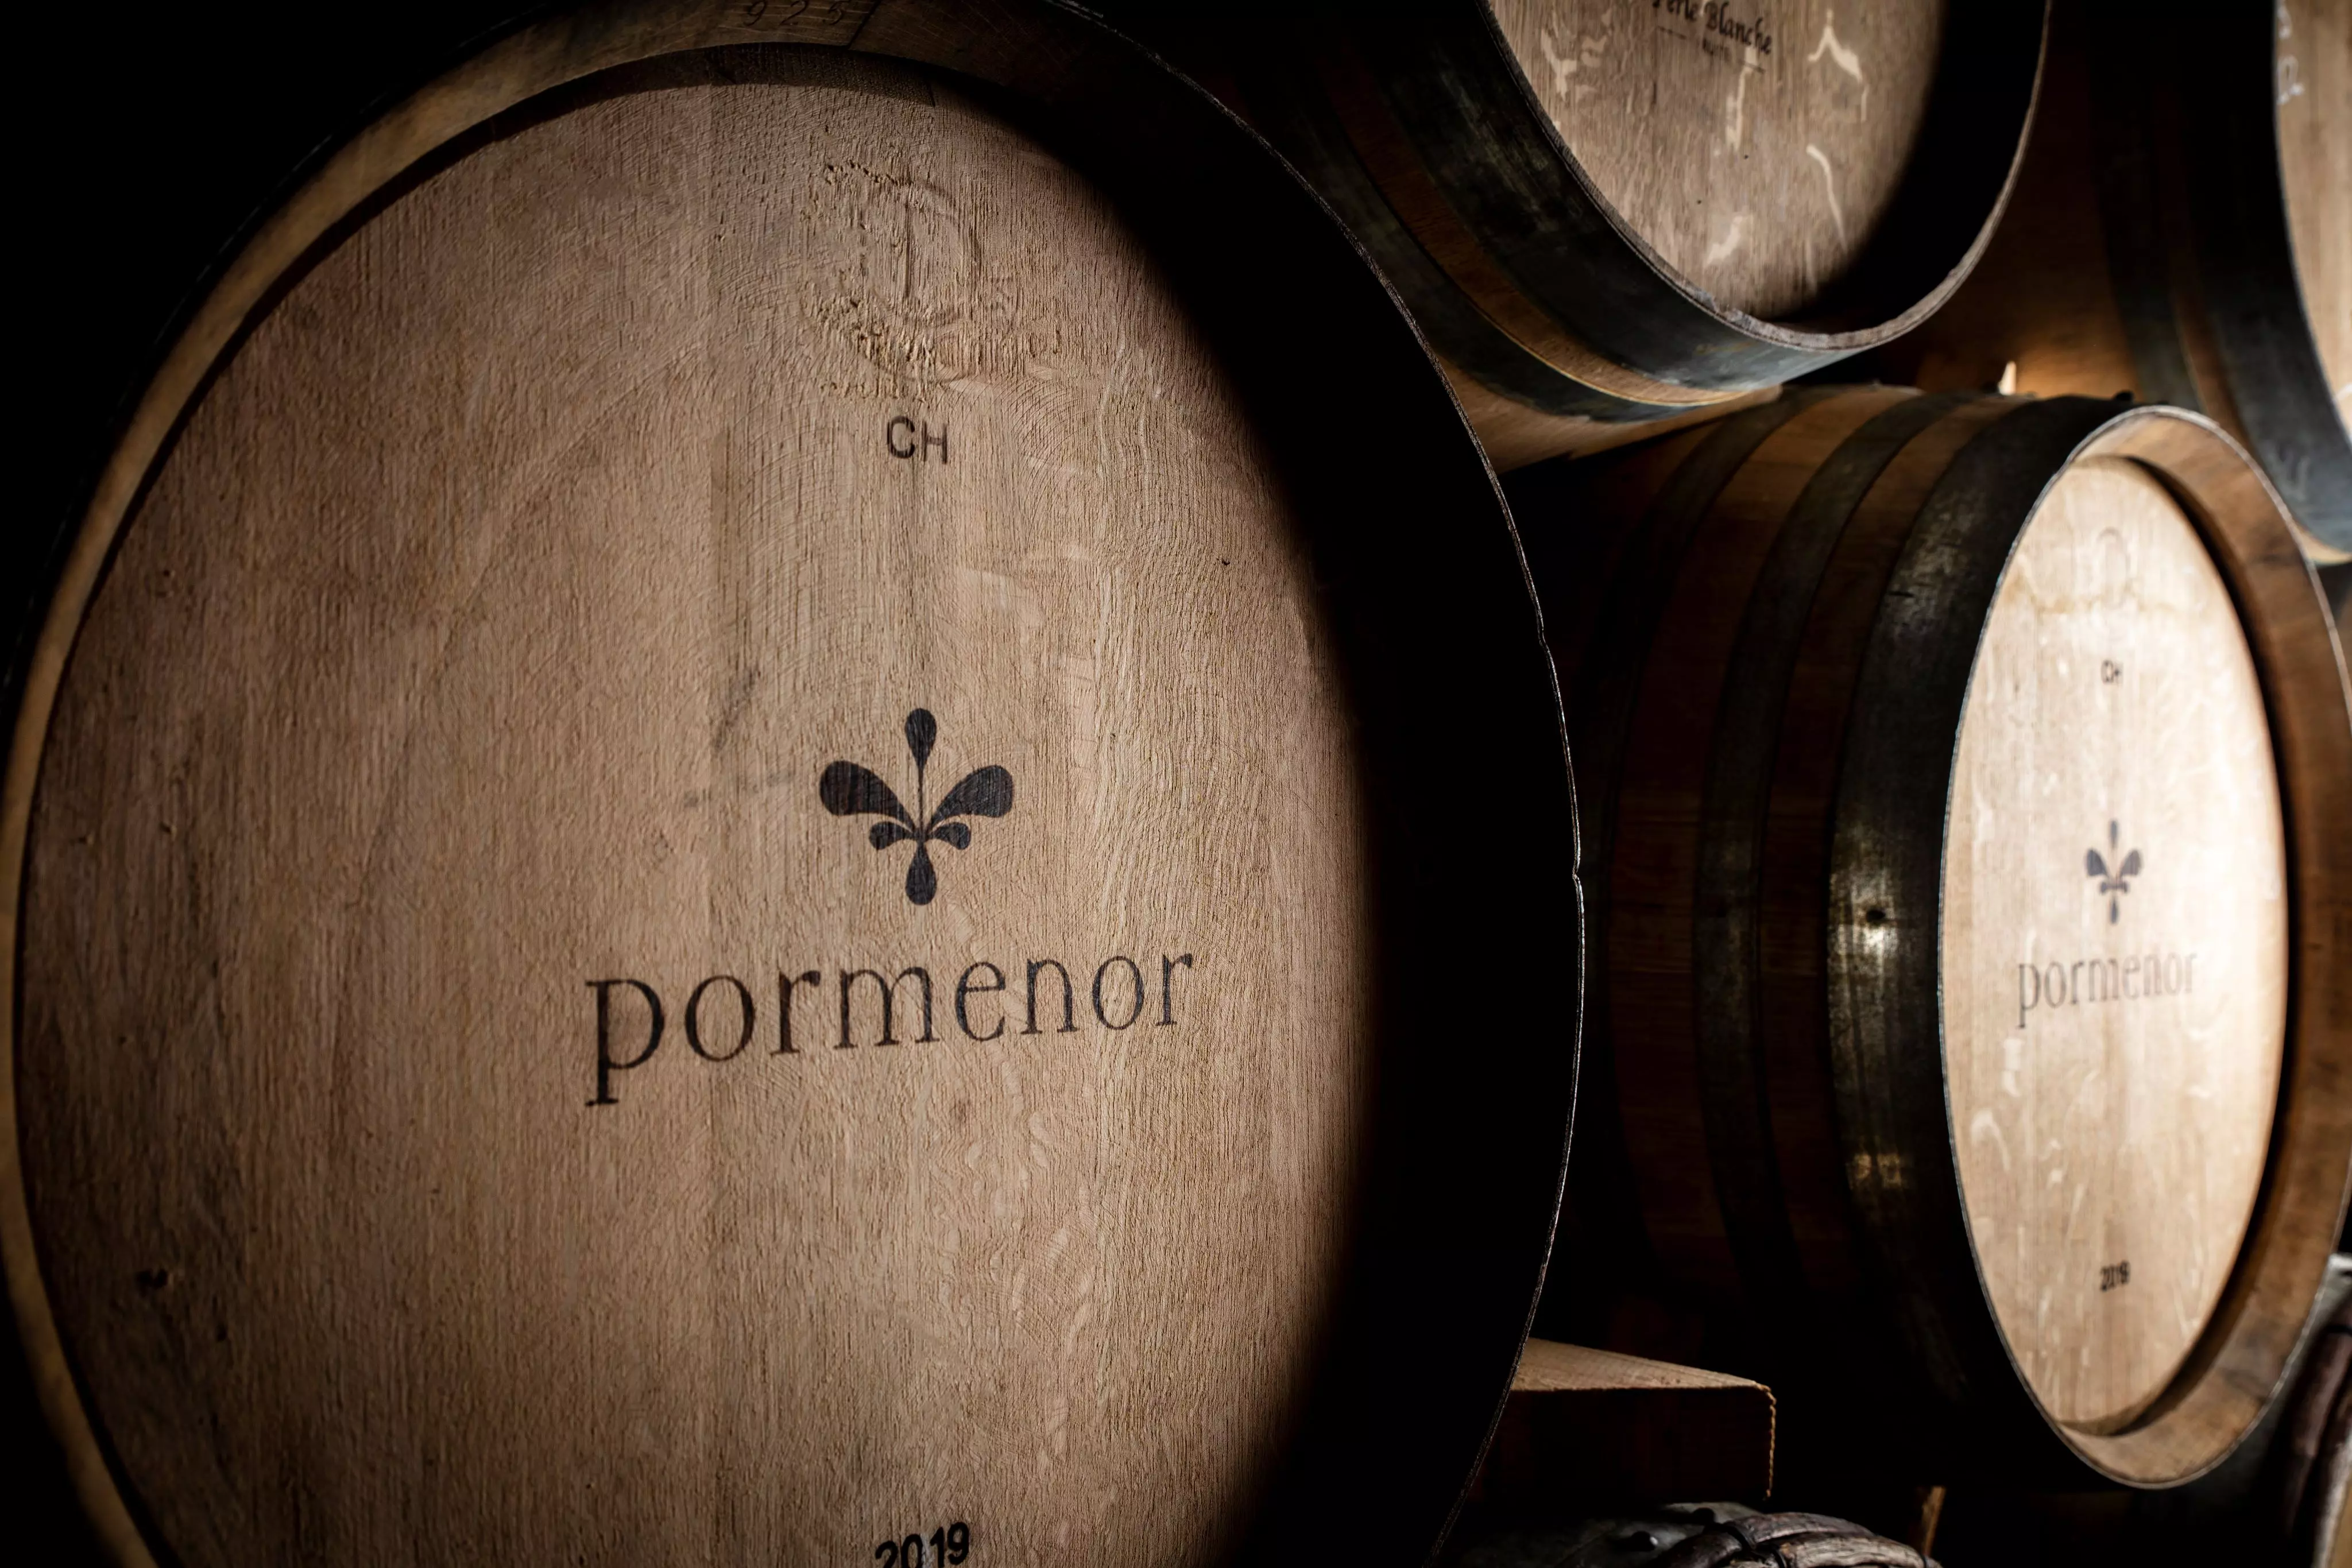 Pormenor – It’s all about the little things